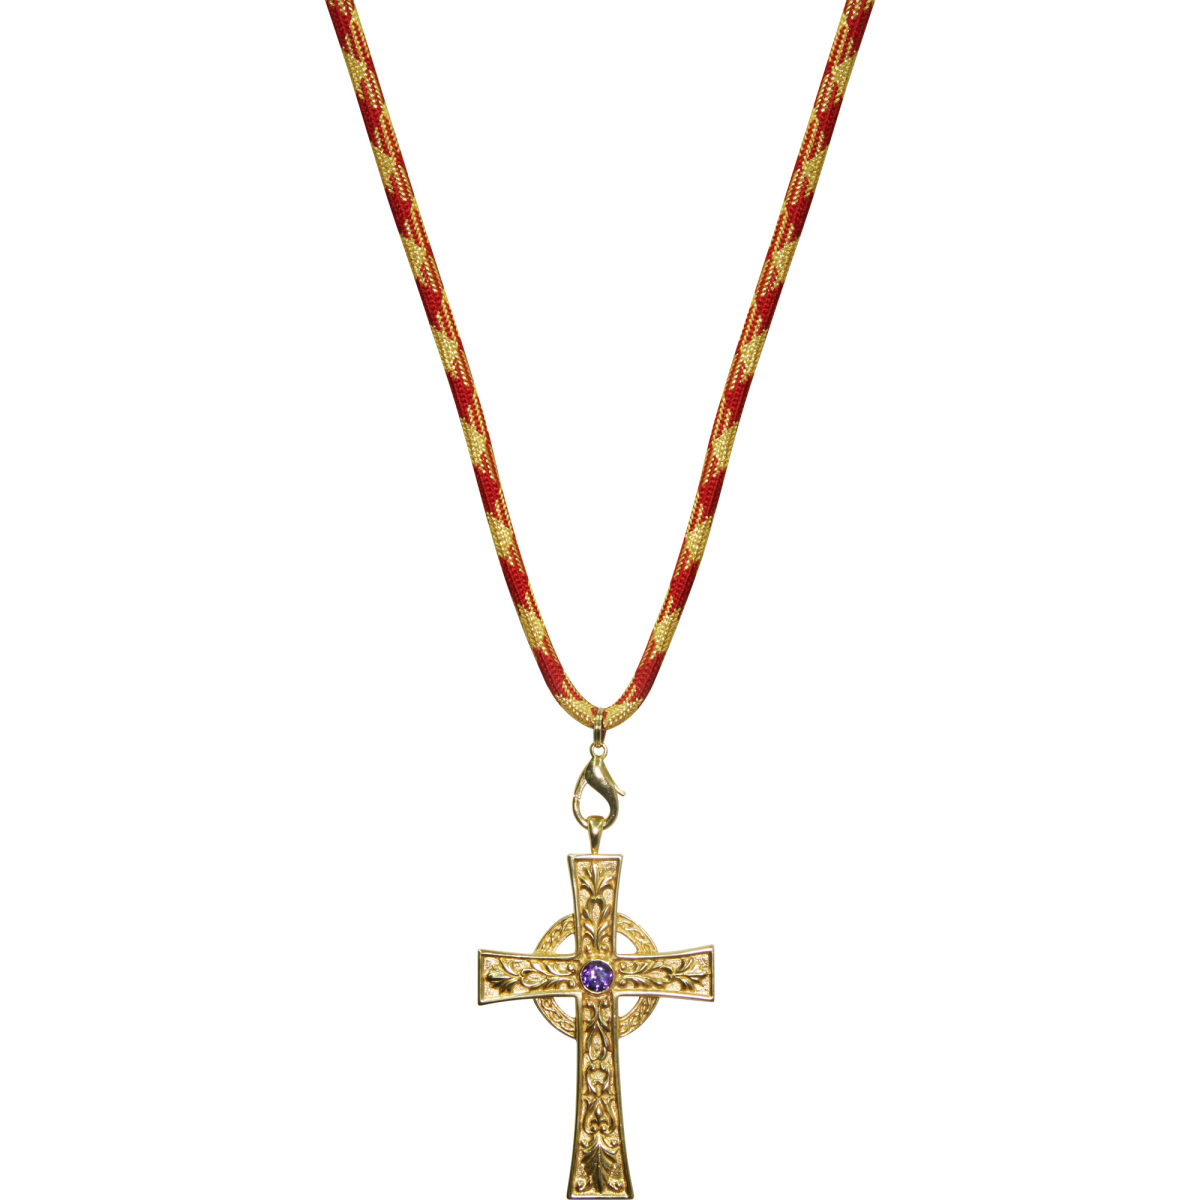 Clergy Crosses | Classic Clergy Crosses and Cross Necklaces — Matthew F.  Sheehan